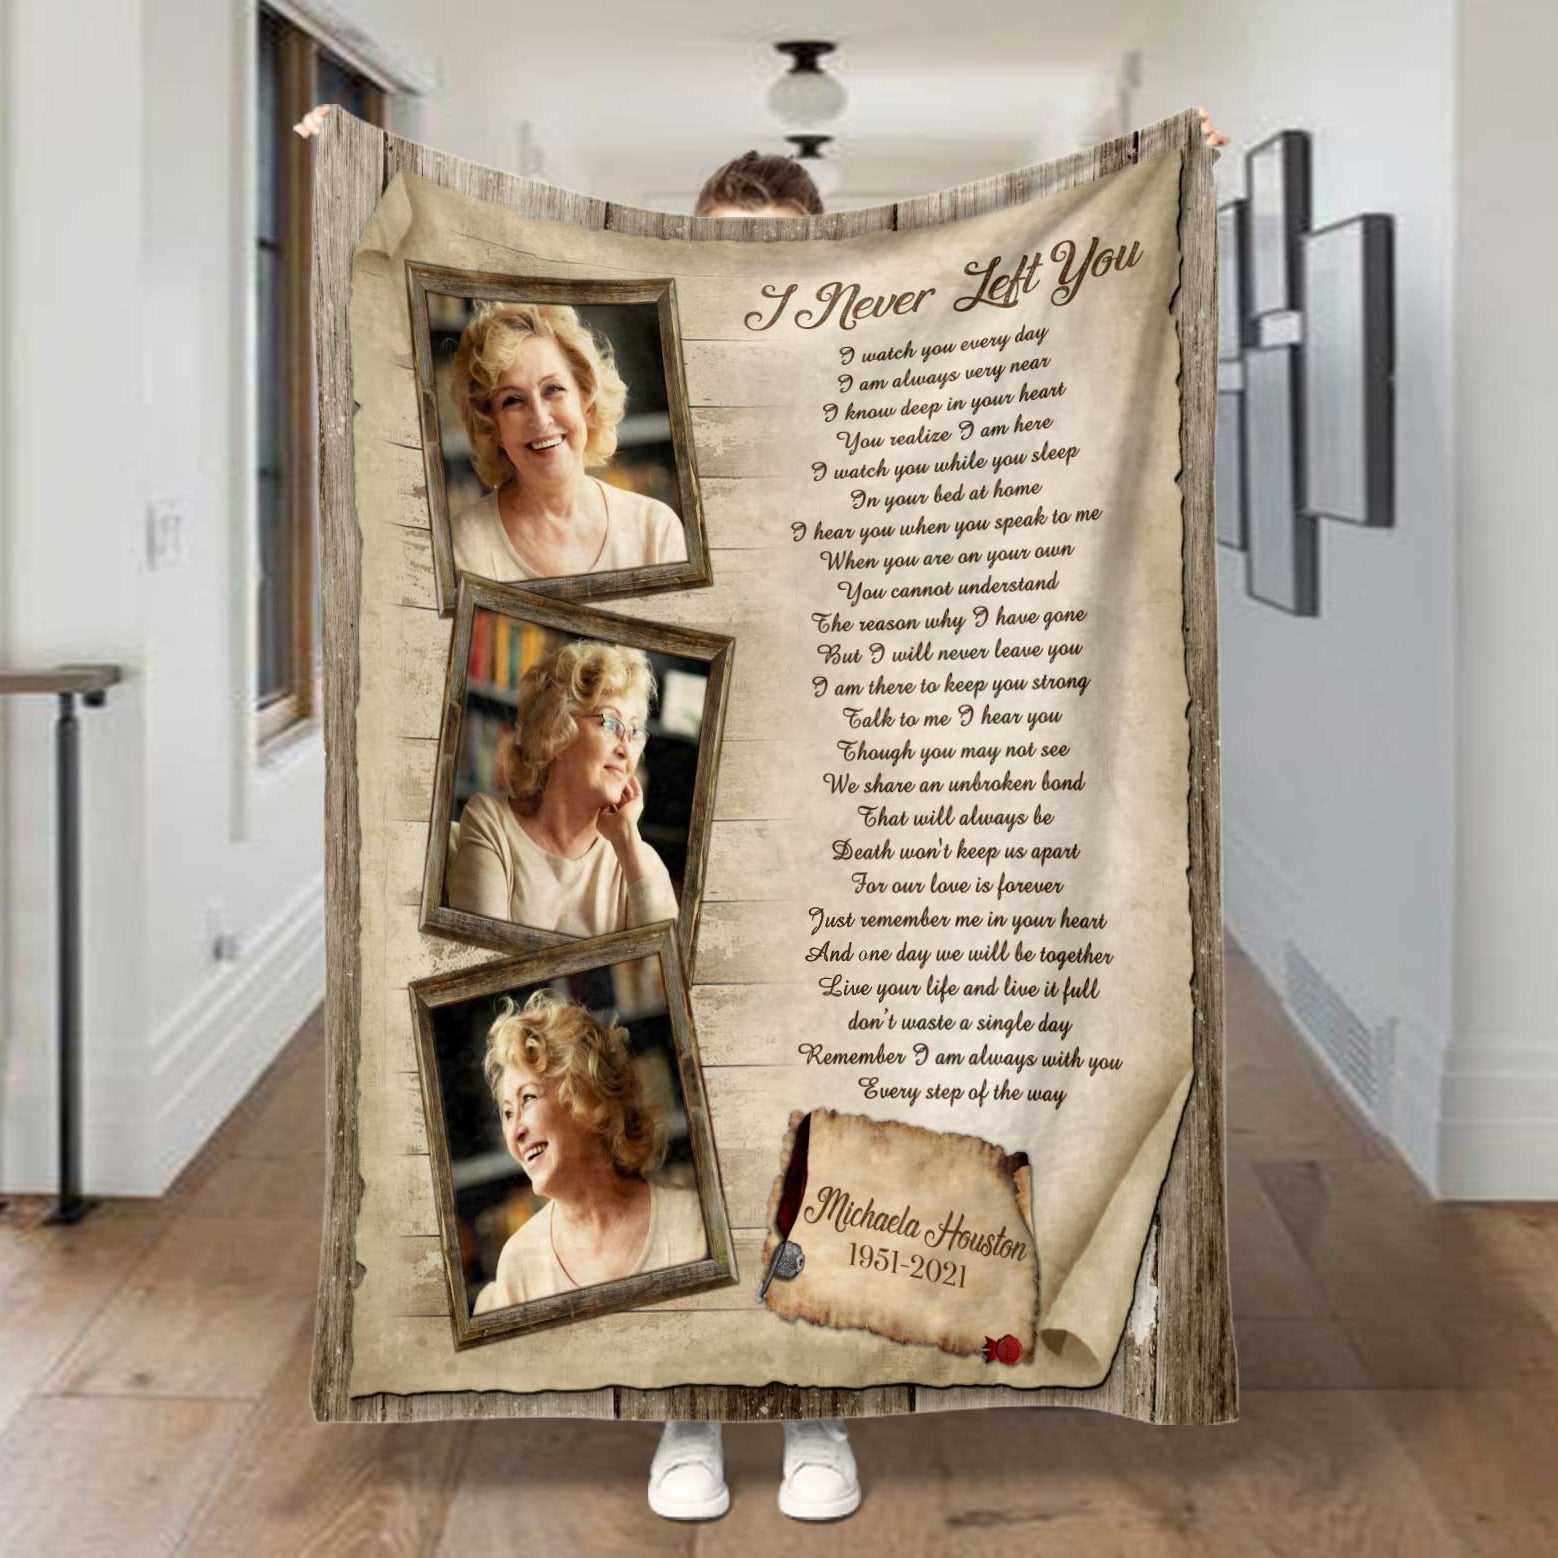 I Never Left You, Memorial Blankets With Pictures, Sympathy Throw Blankets For Loss Of Mother, In Loving Memory Fleece Blanket, Bereavement Blankets